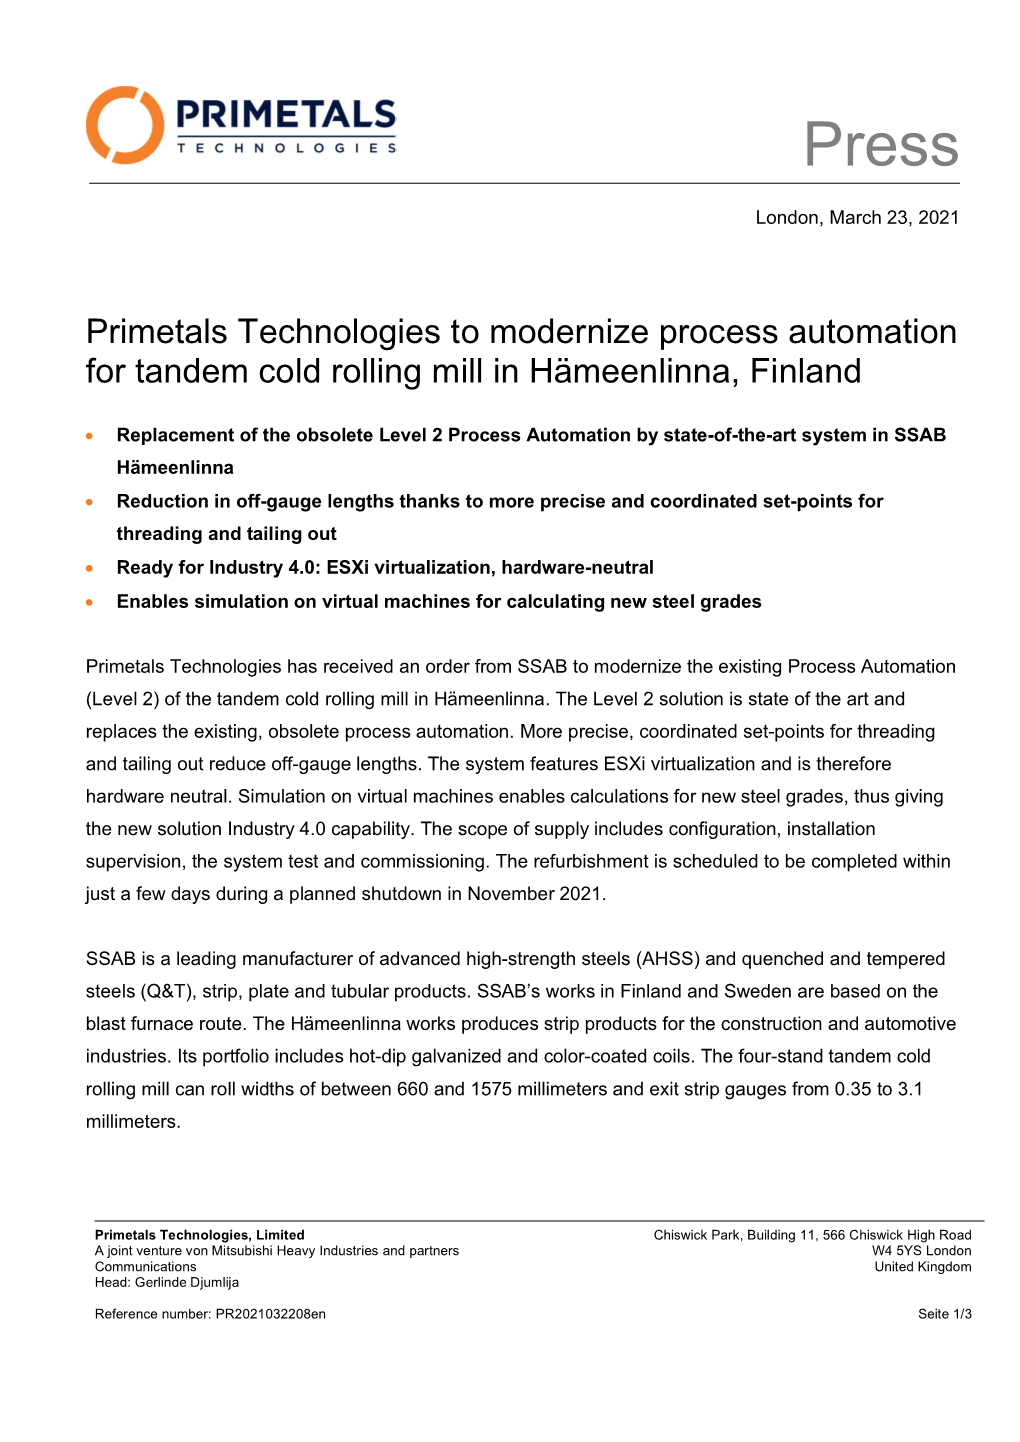 Primetals Technologies to Modernize Process Automation for Tandem Cold Rolling Mill in Hämeenlinna, Finland